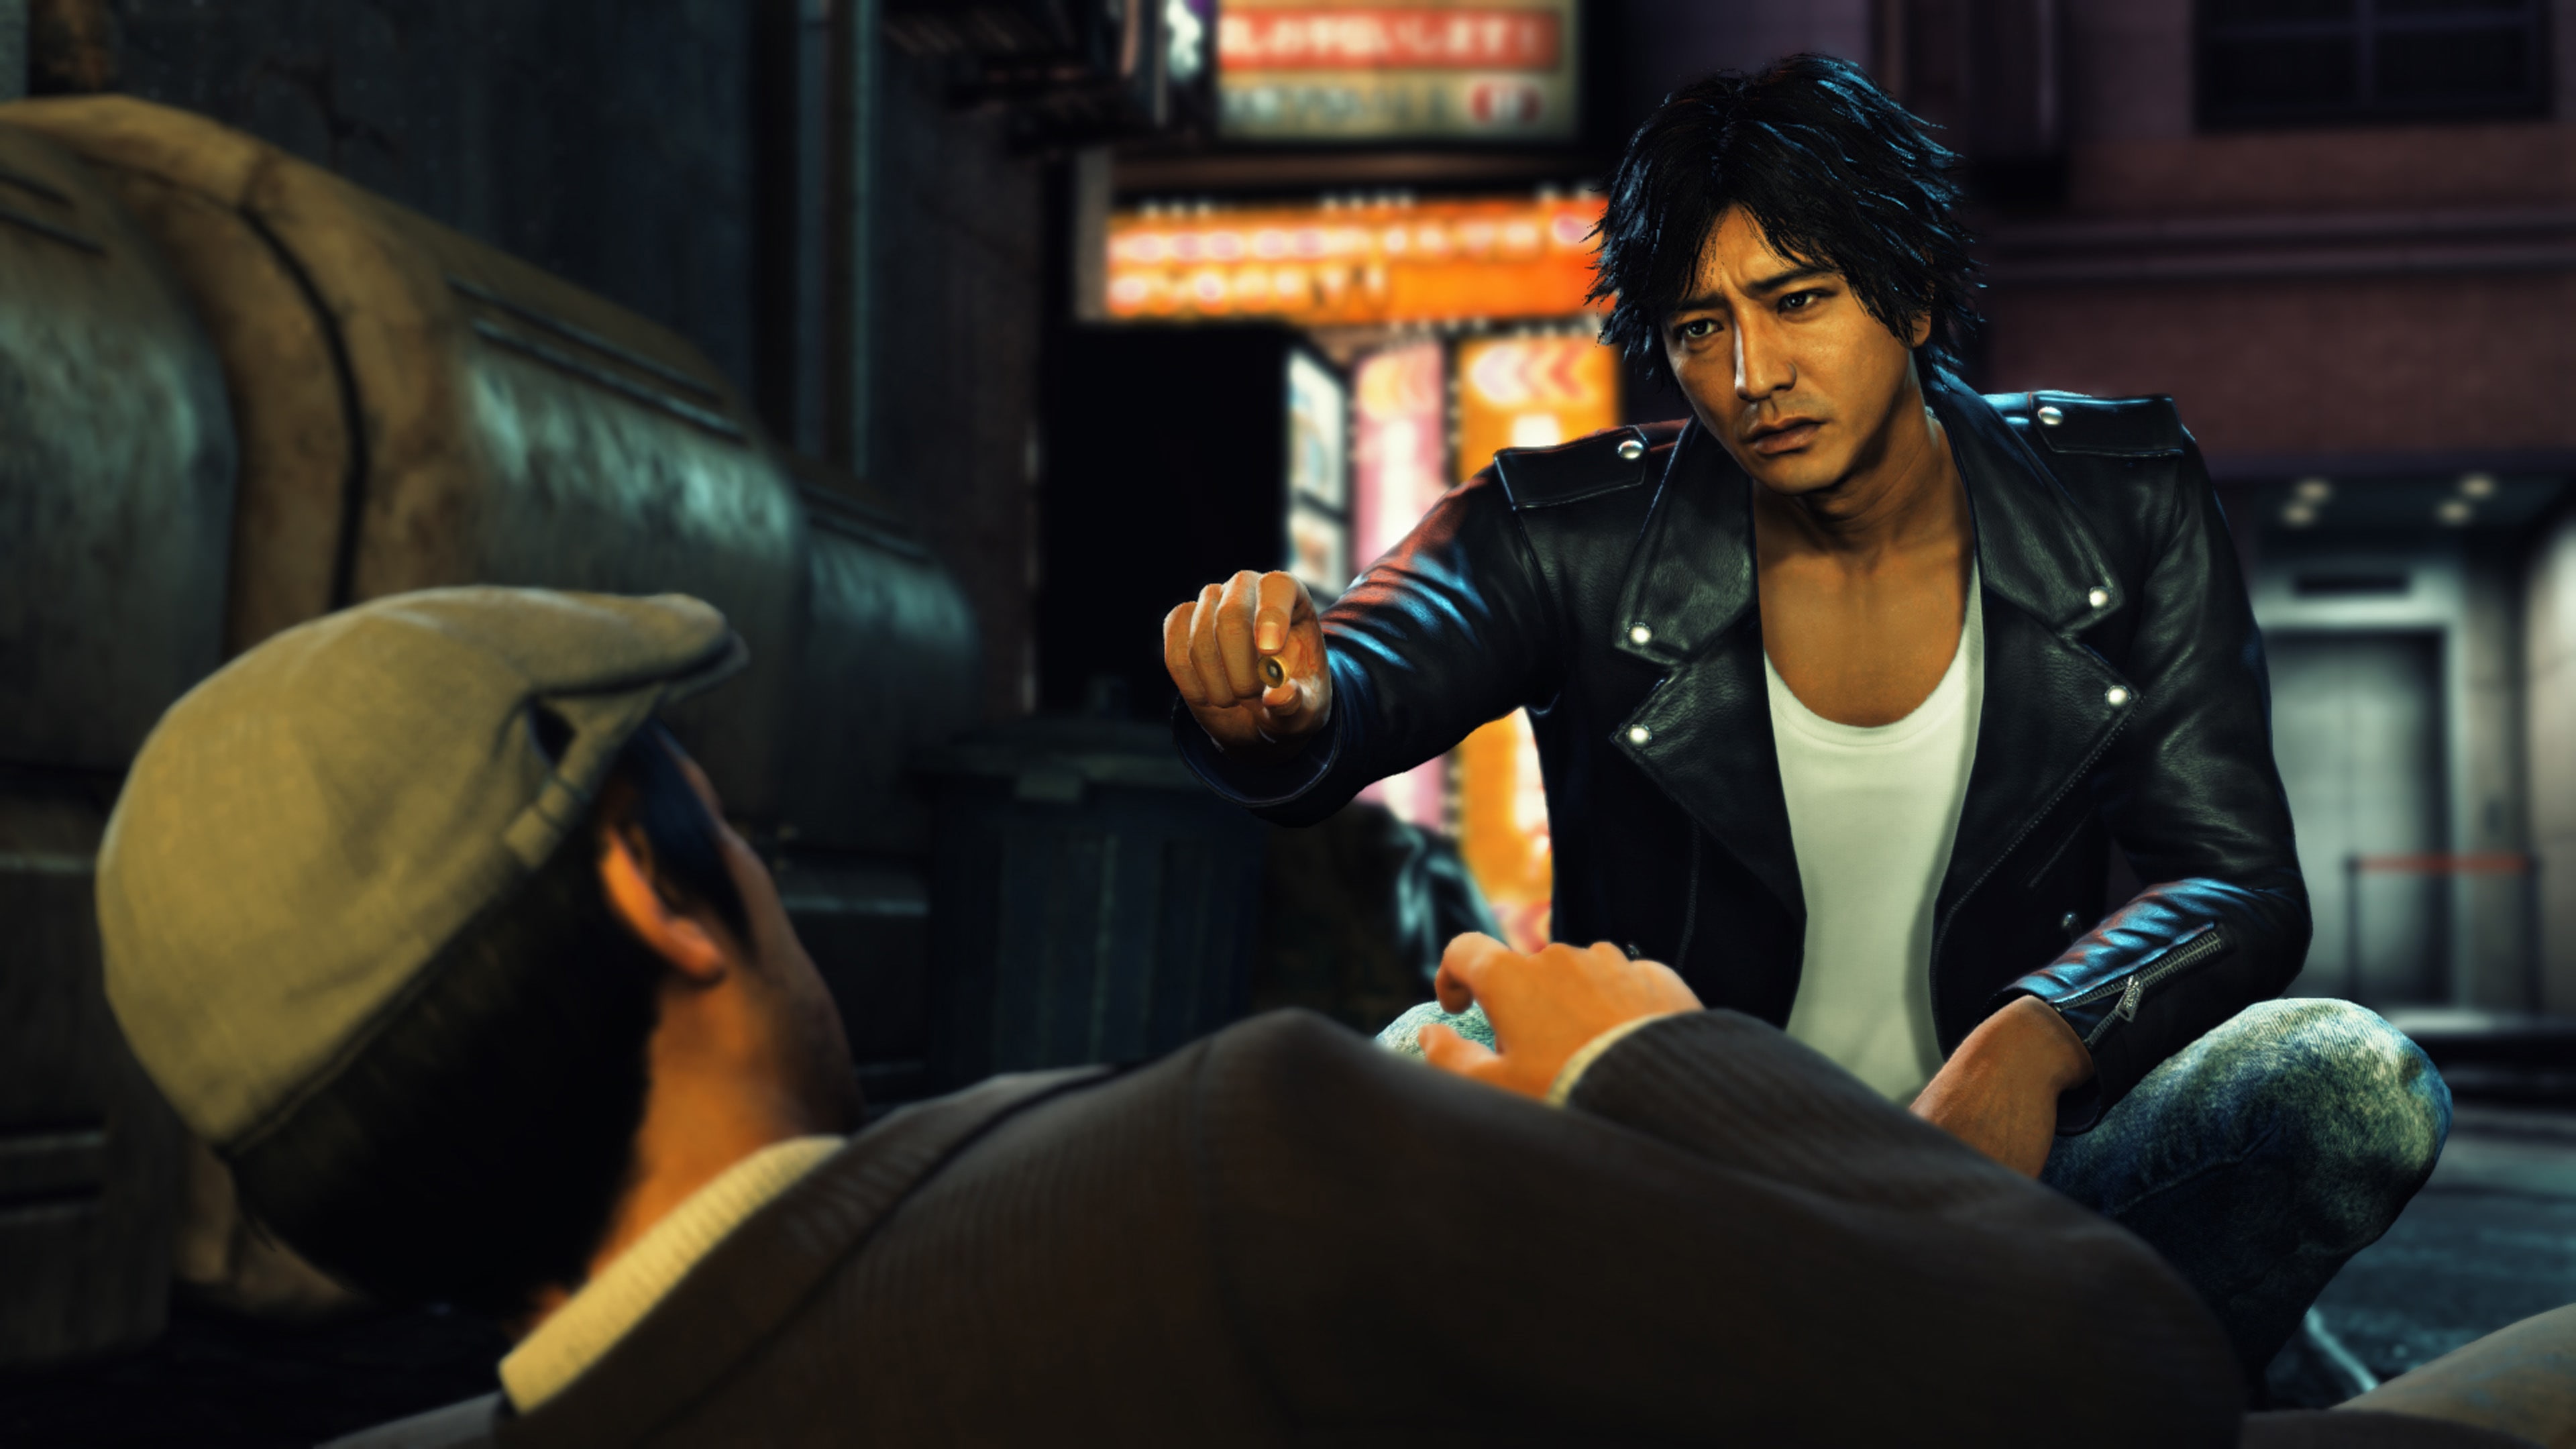 judgment ps4 store